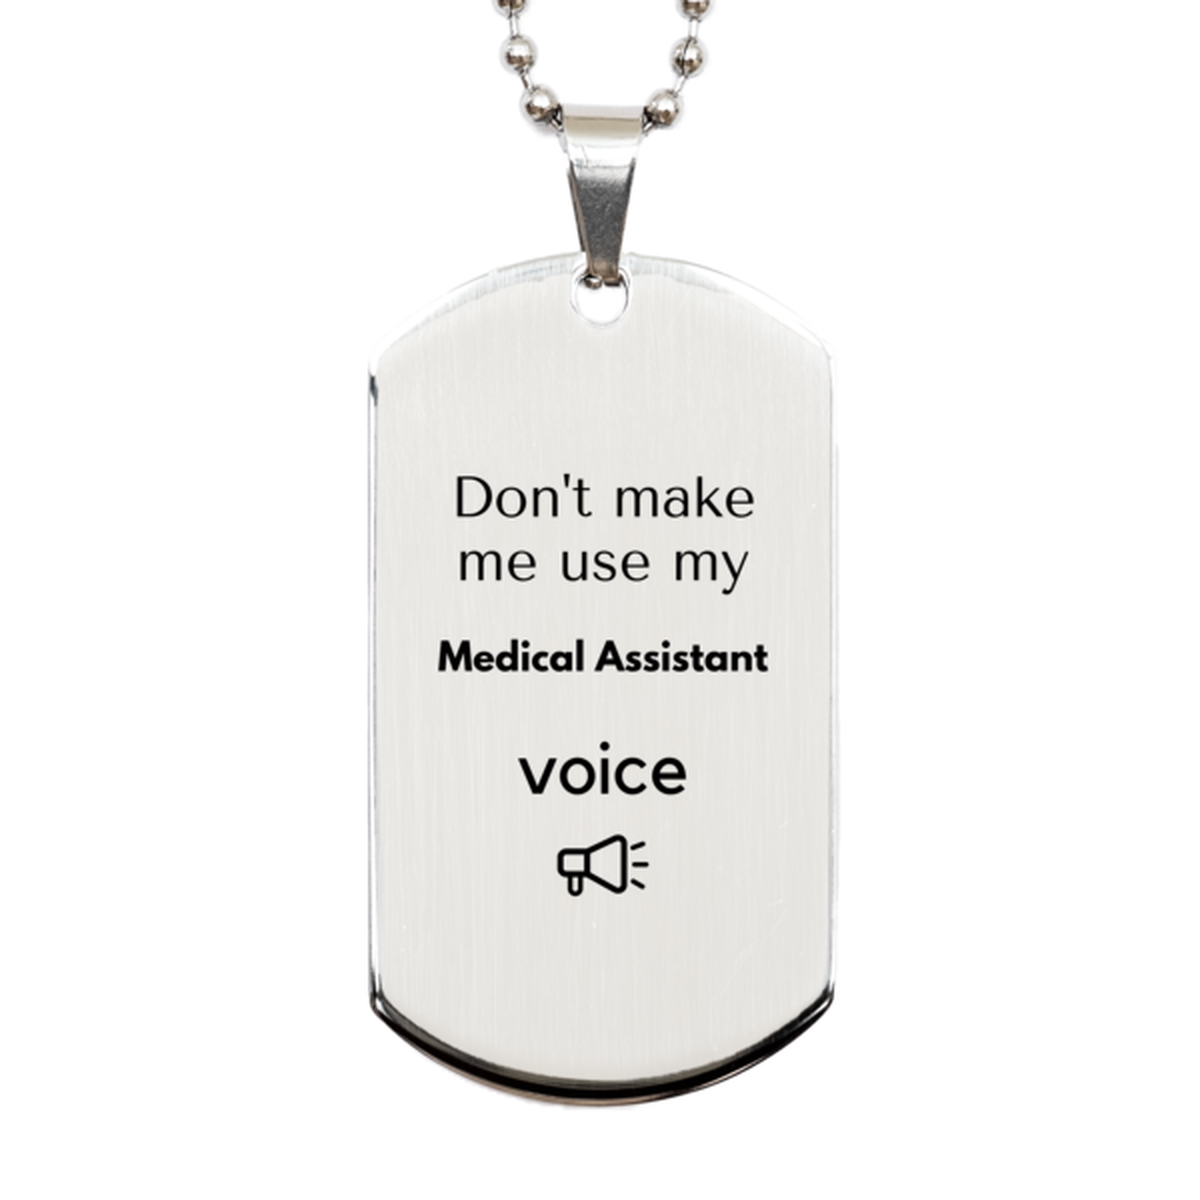 Don't make me use my Medical Assistant voice, Sarcasm Medical Assistant Gifts, Christmas Medical Assistant Silver Dog Tag Birthday Unique Gifts For Medical Assistant Coworkers, Men, Women, Colleague, Friends